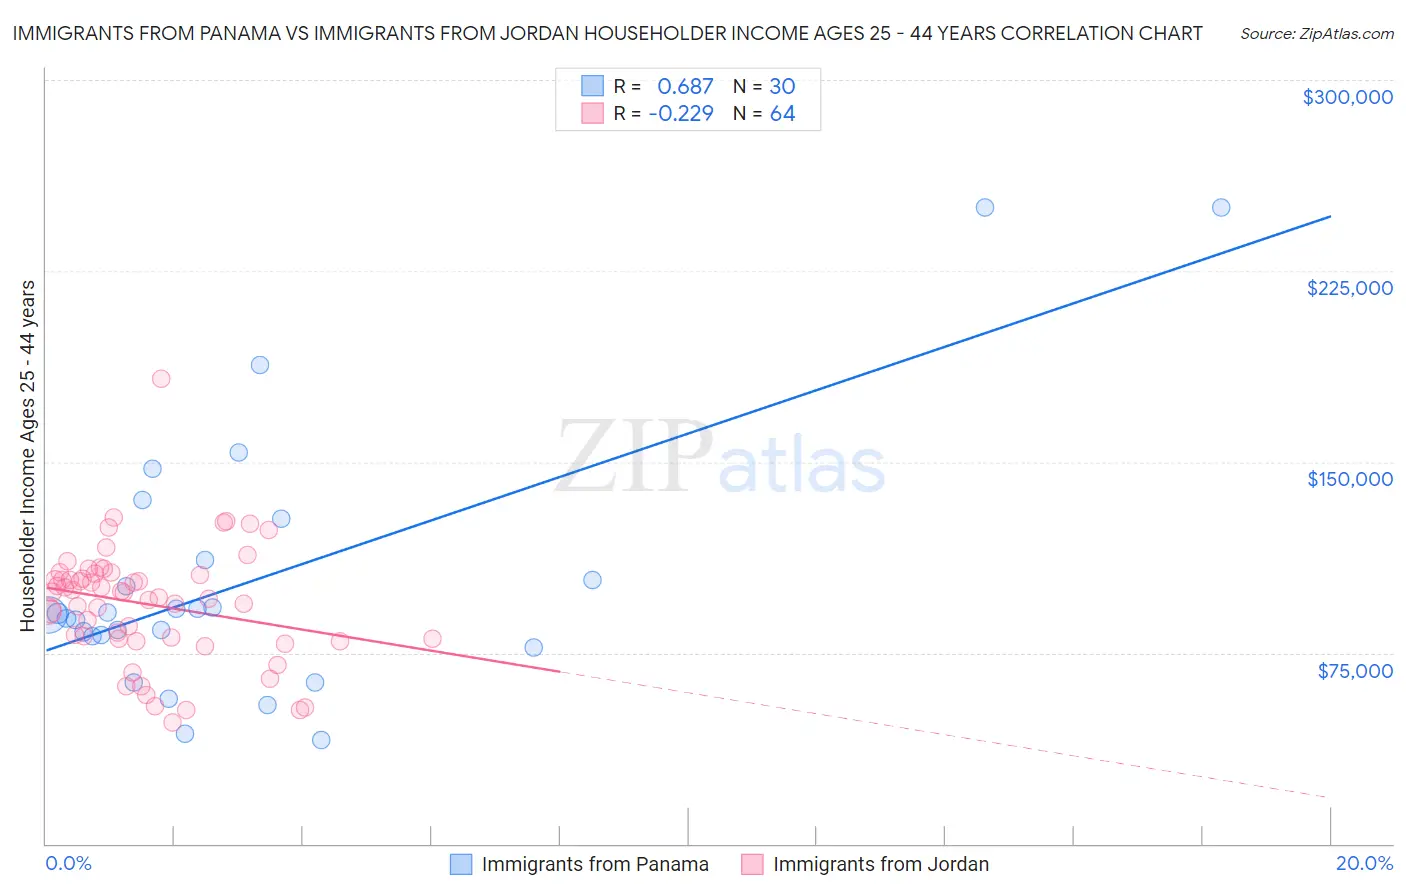 Immigrants from Panama vs Immigrants from Jordan Householder Income Ages 25 - 44 years